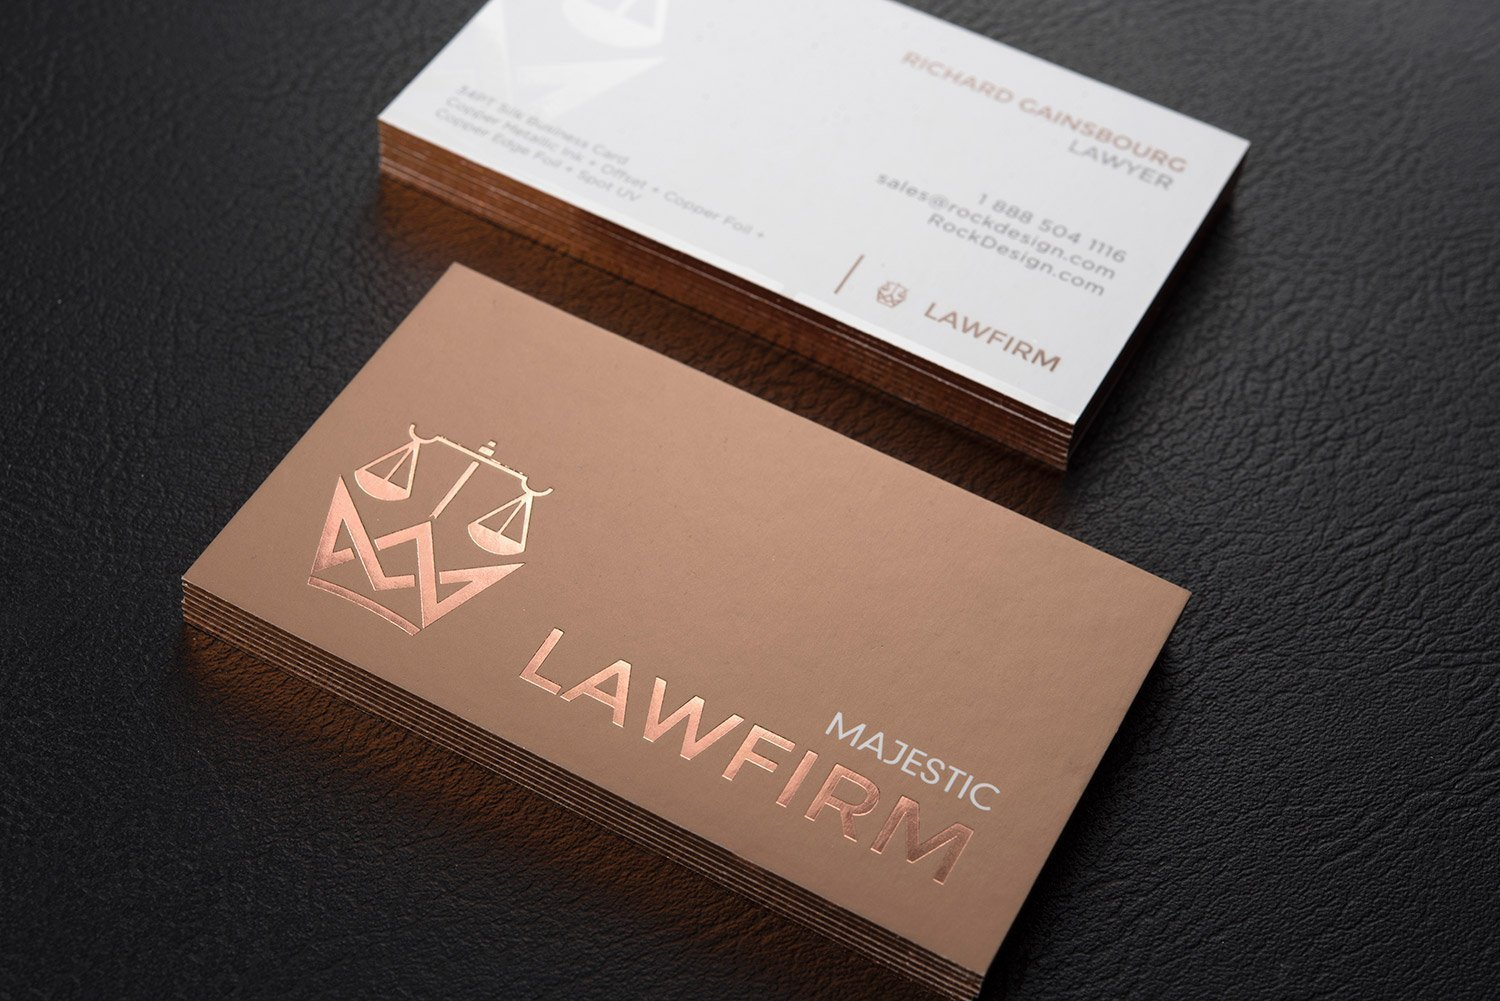 Top 25 Professional Lawyer Business Cards Tips & Examples Regarding Lawyer Business Cards Templates